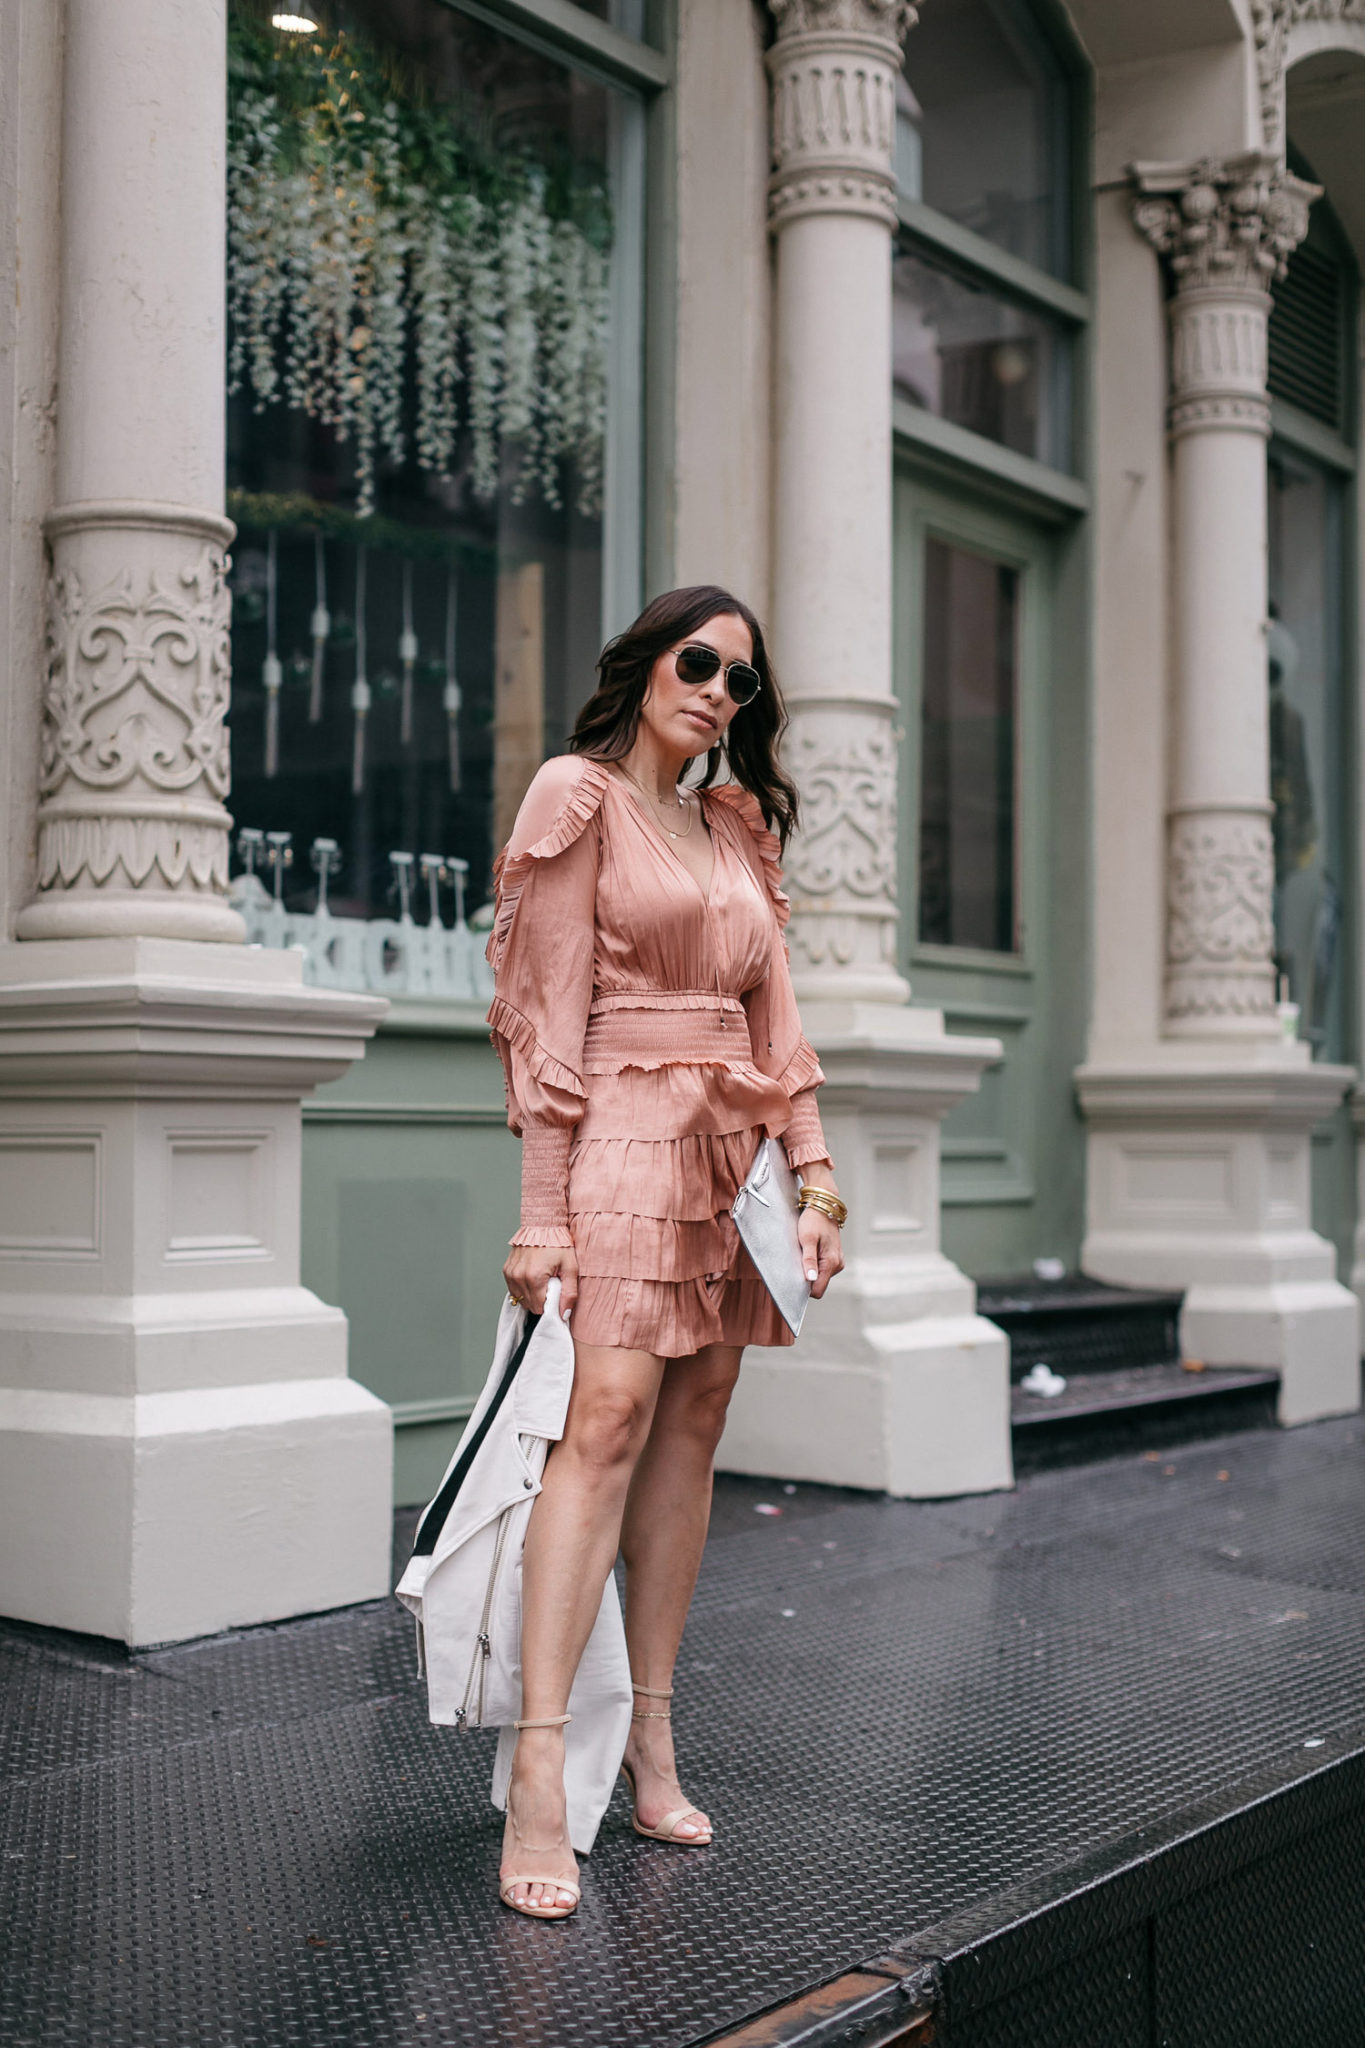 Amanda wears the Amanda and Kristen dress in blush and shares 10 fun birthday facts for her special day